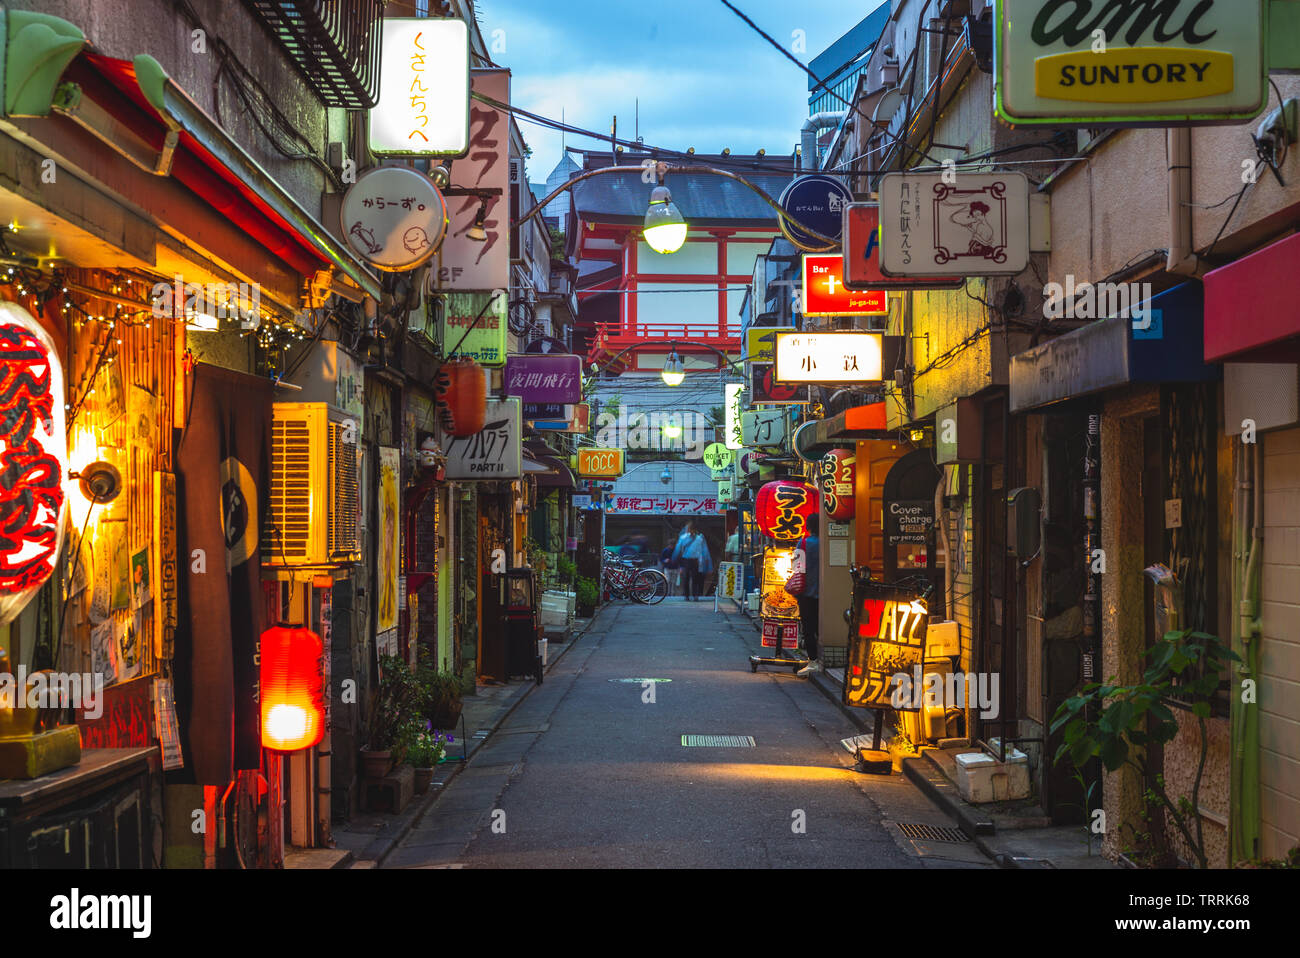 Tokyo, Japan - June 11, 2019: night scene of Shinjuku Golden Gai, There are over 200 tiny shanty-style bars, clubs and eateries, and famous for the ni Stock Photo